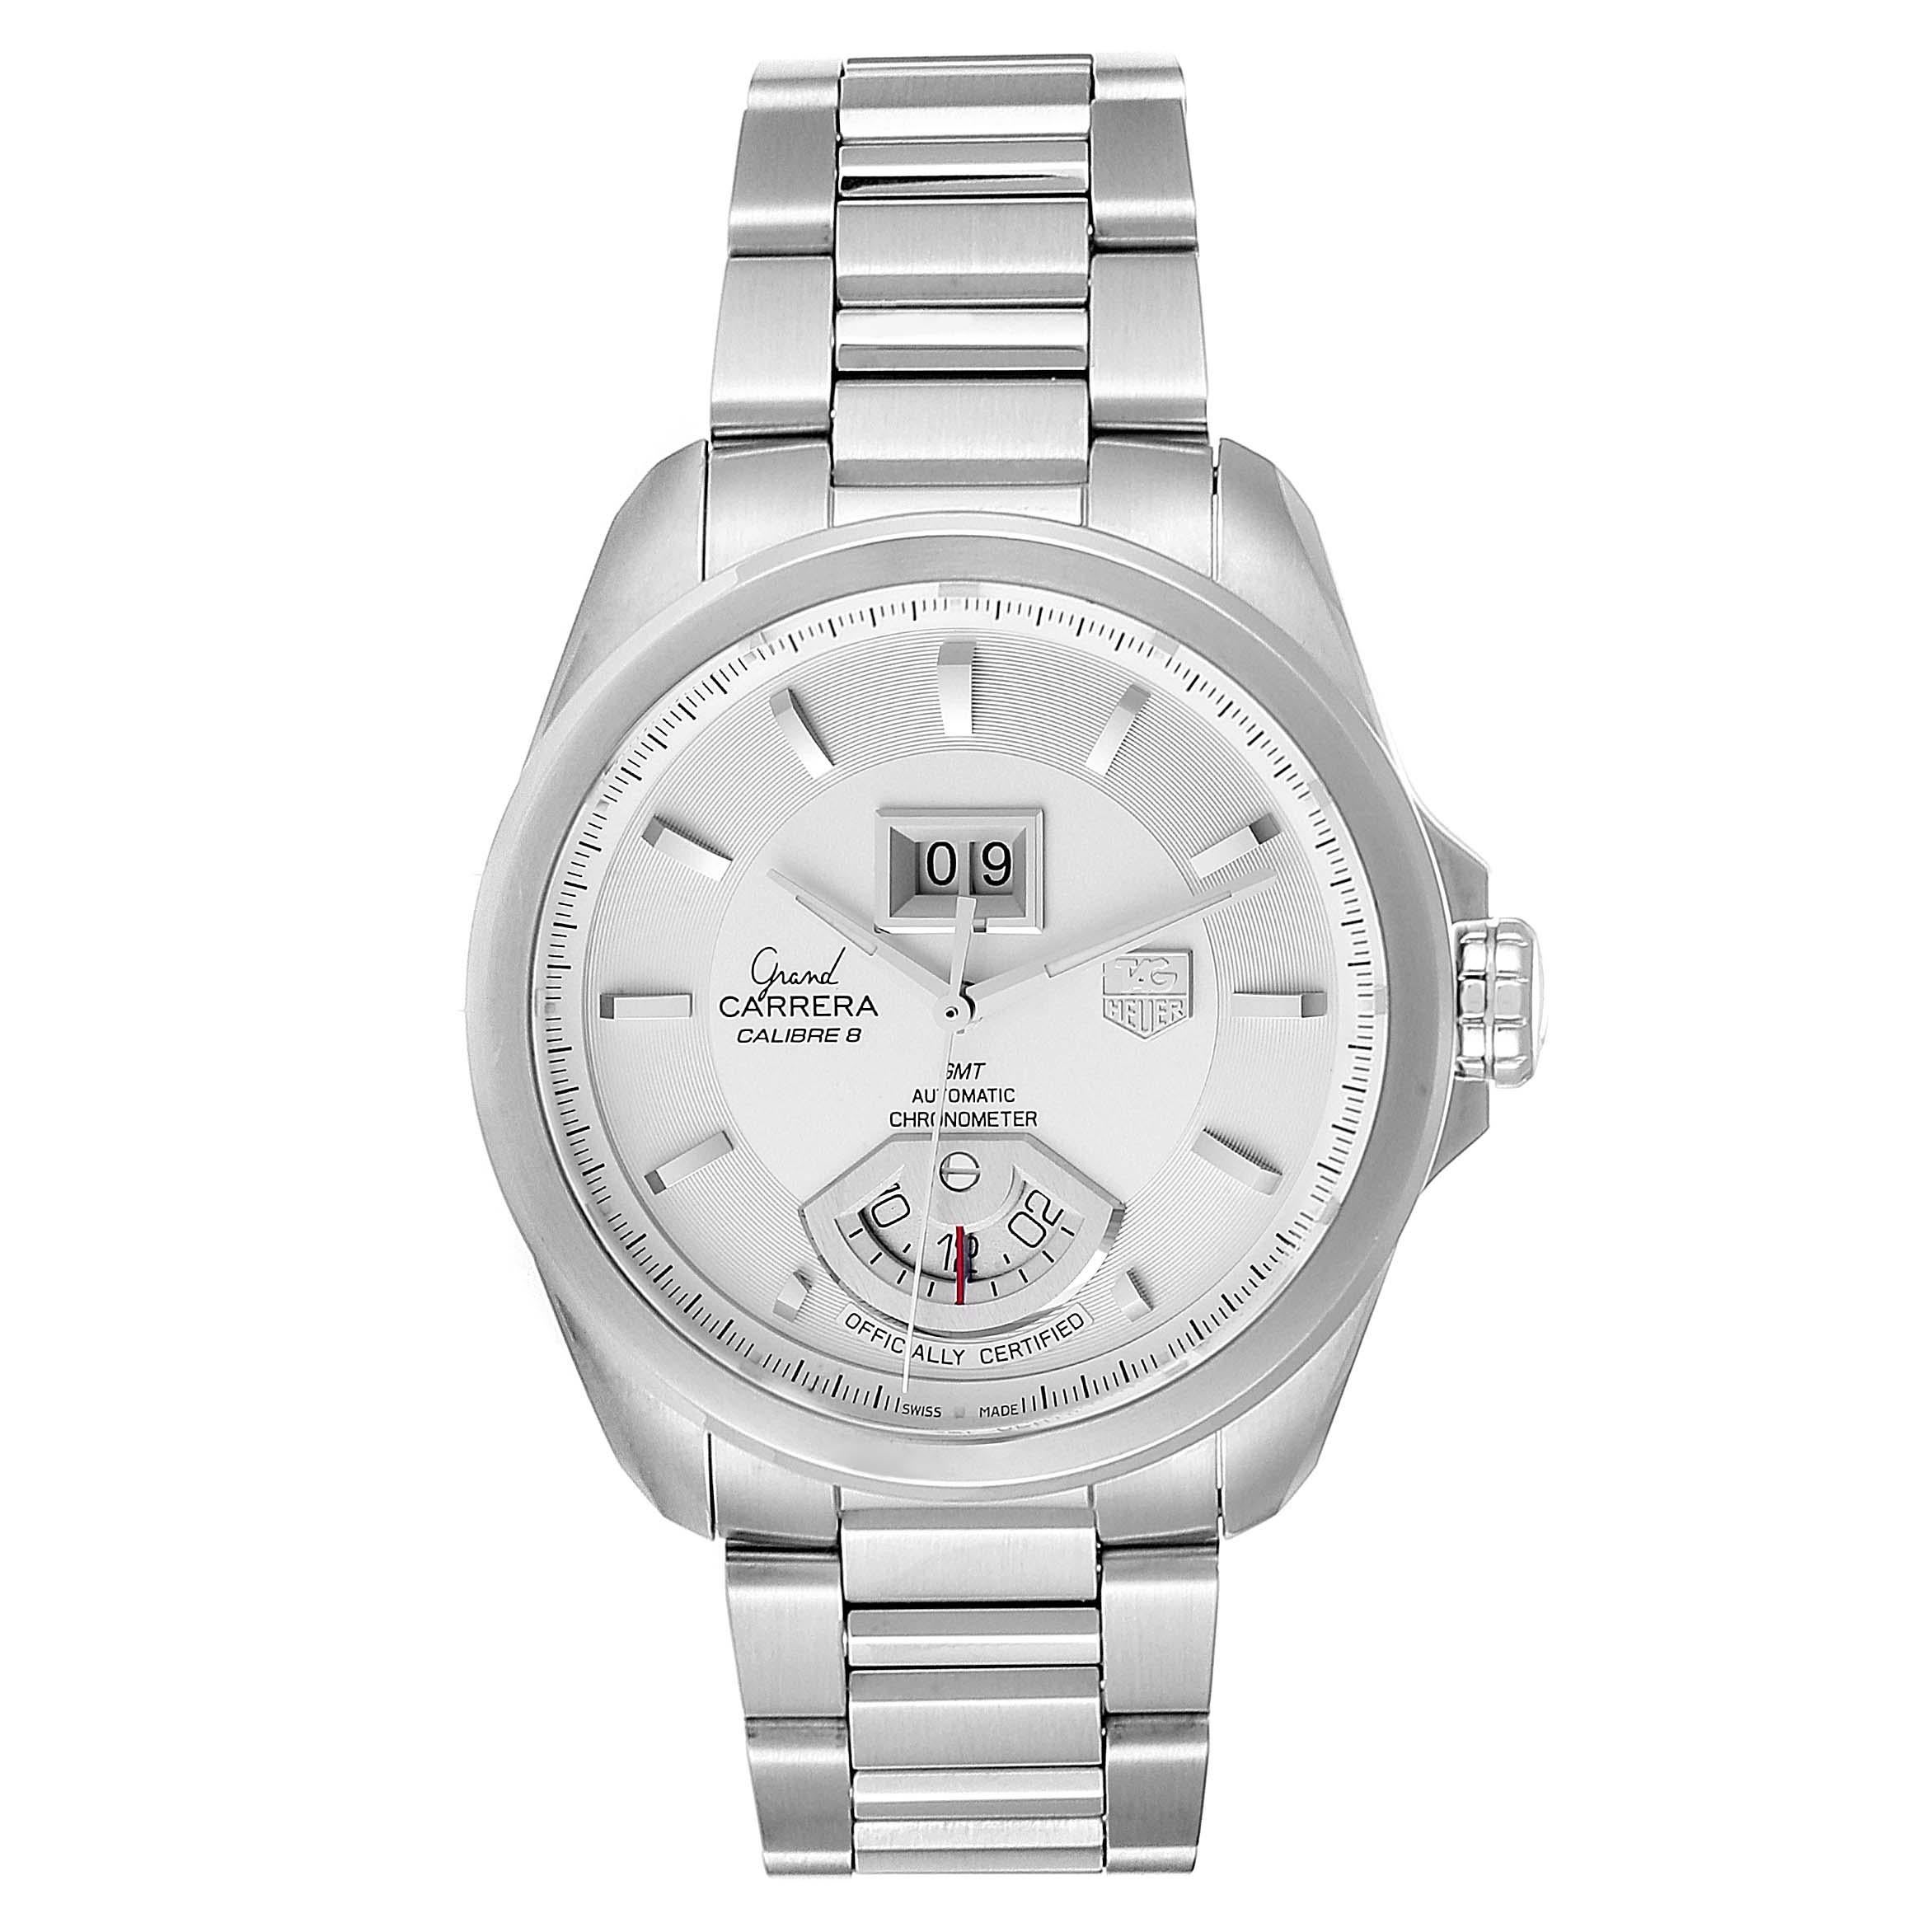 Tag Heuer Grand Carrera GMT Chronograph Mens Watch WAV5112 Box Card. Automatic self-winding movement. Stainless steel case 42.5 mm. Exhibition caseback. Stainless steel bezel. Scratch resistant sapphire crystal. Silver dial with raised index hour